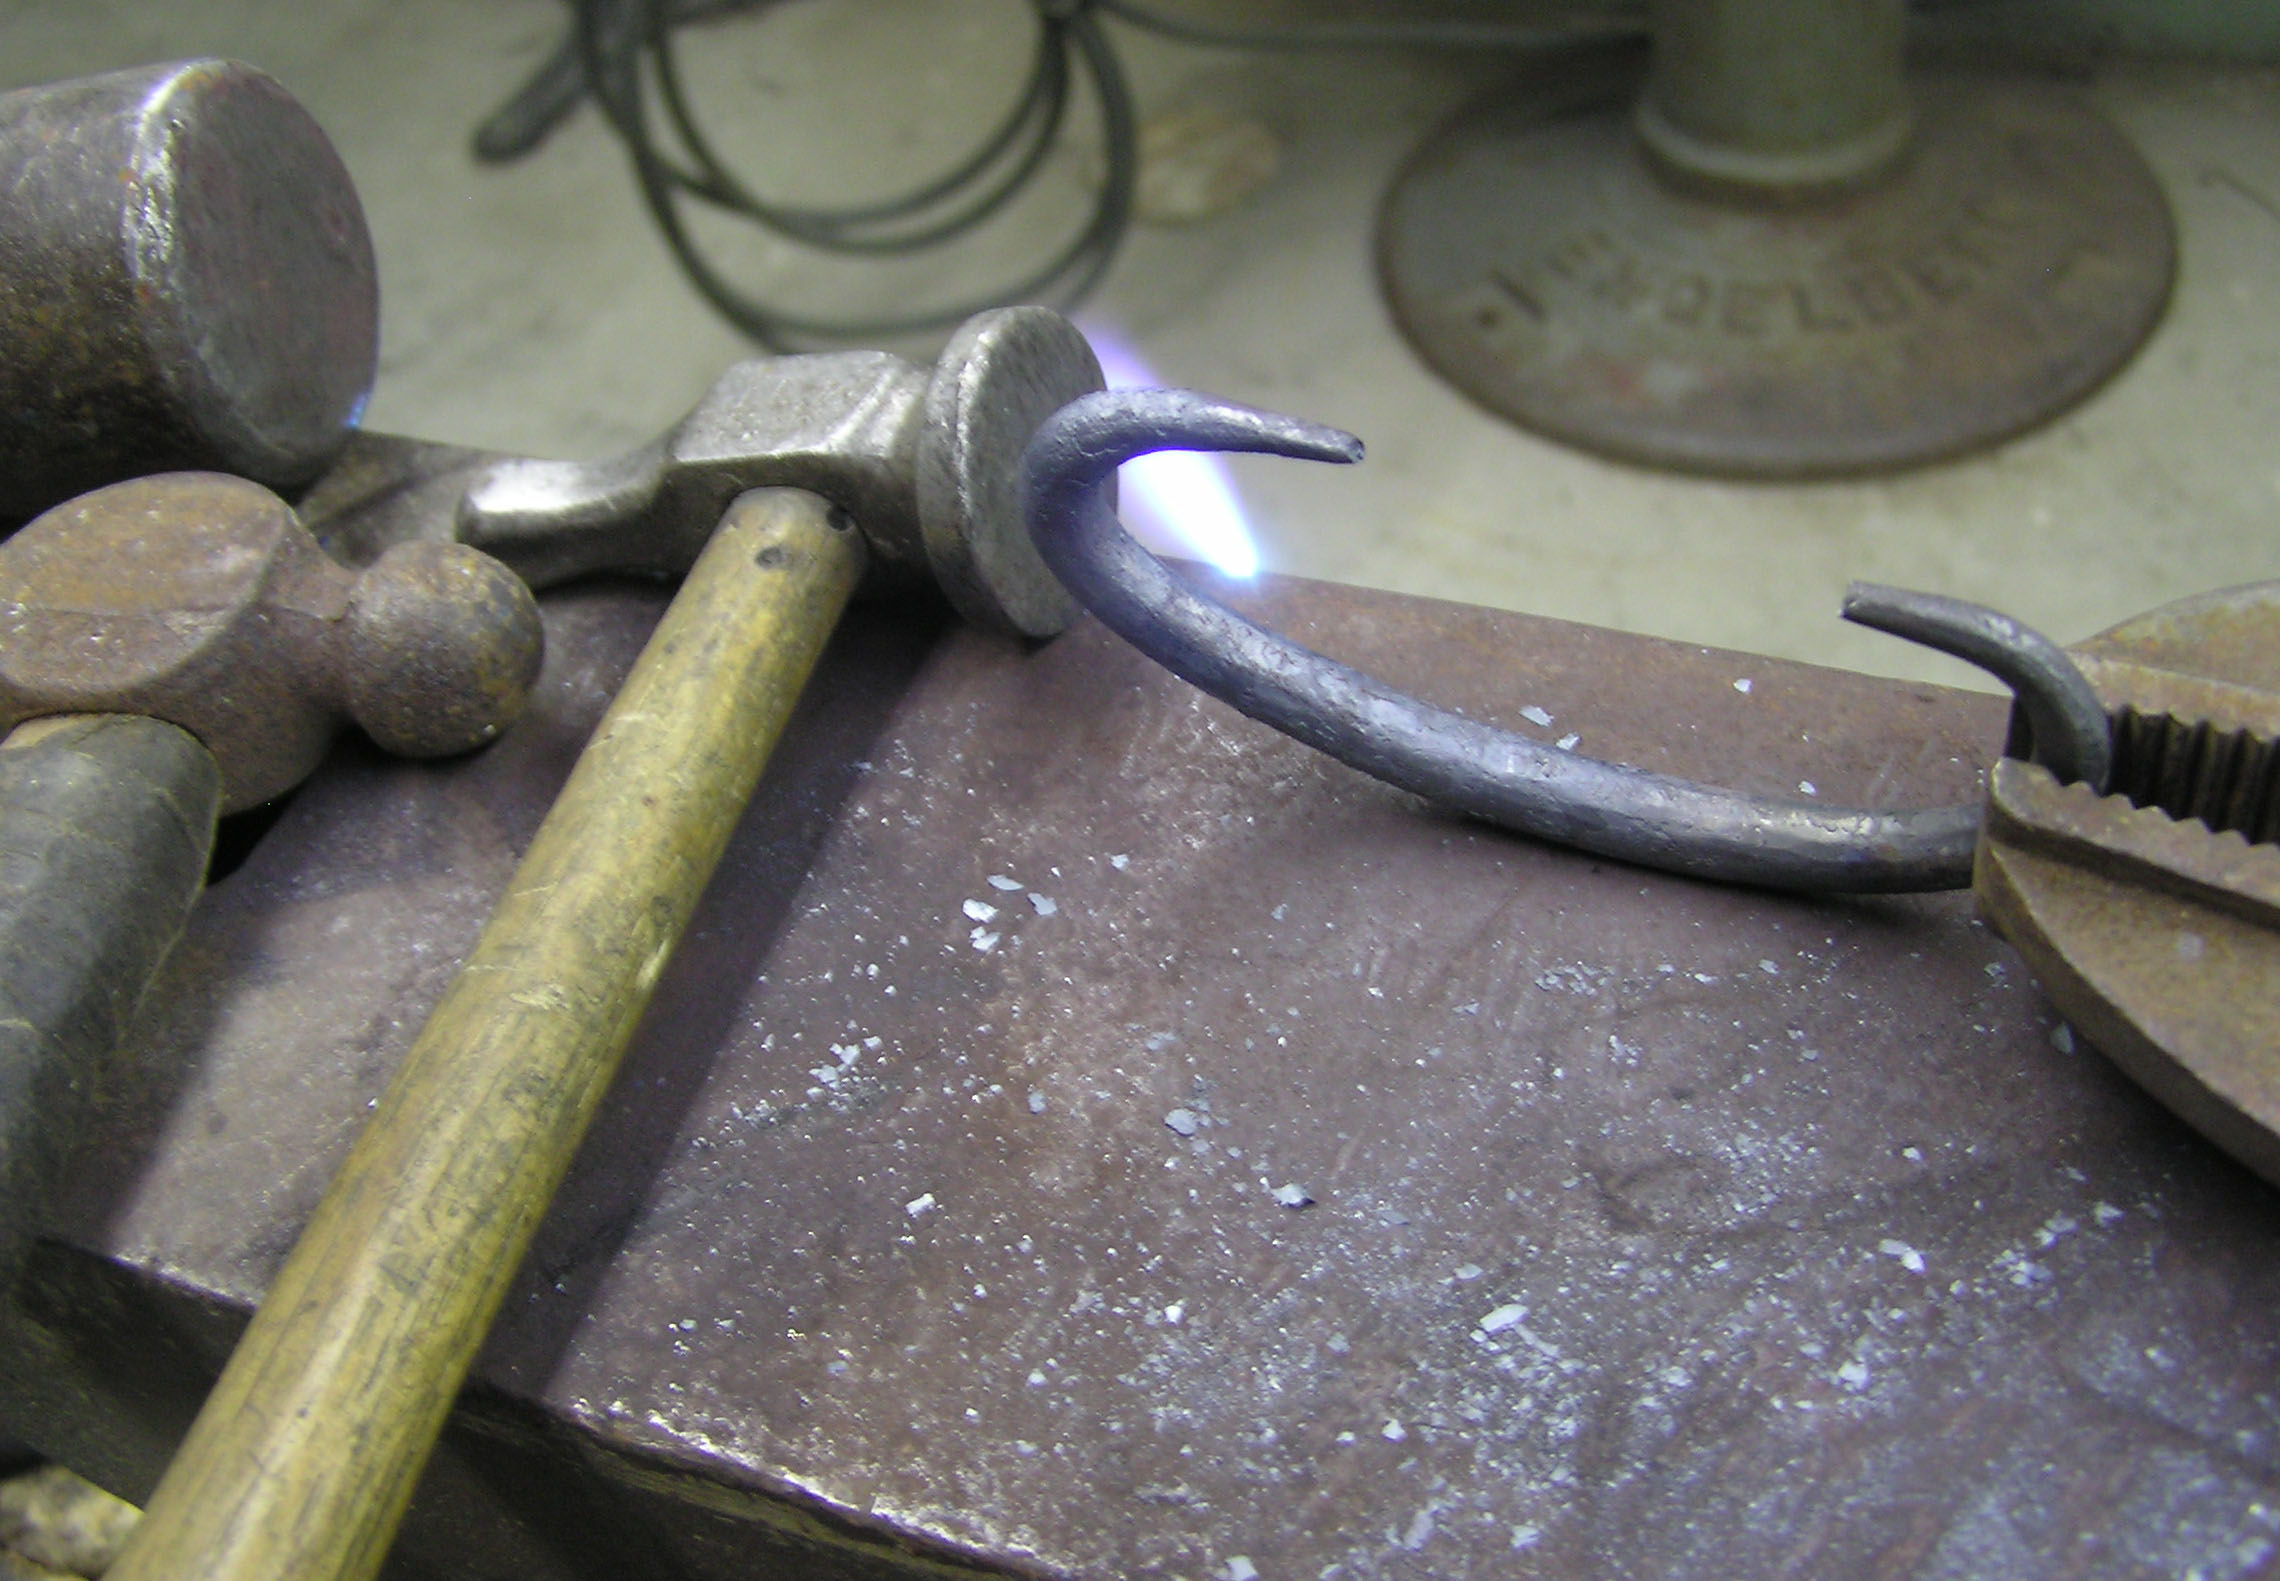 New handle being wrought